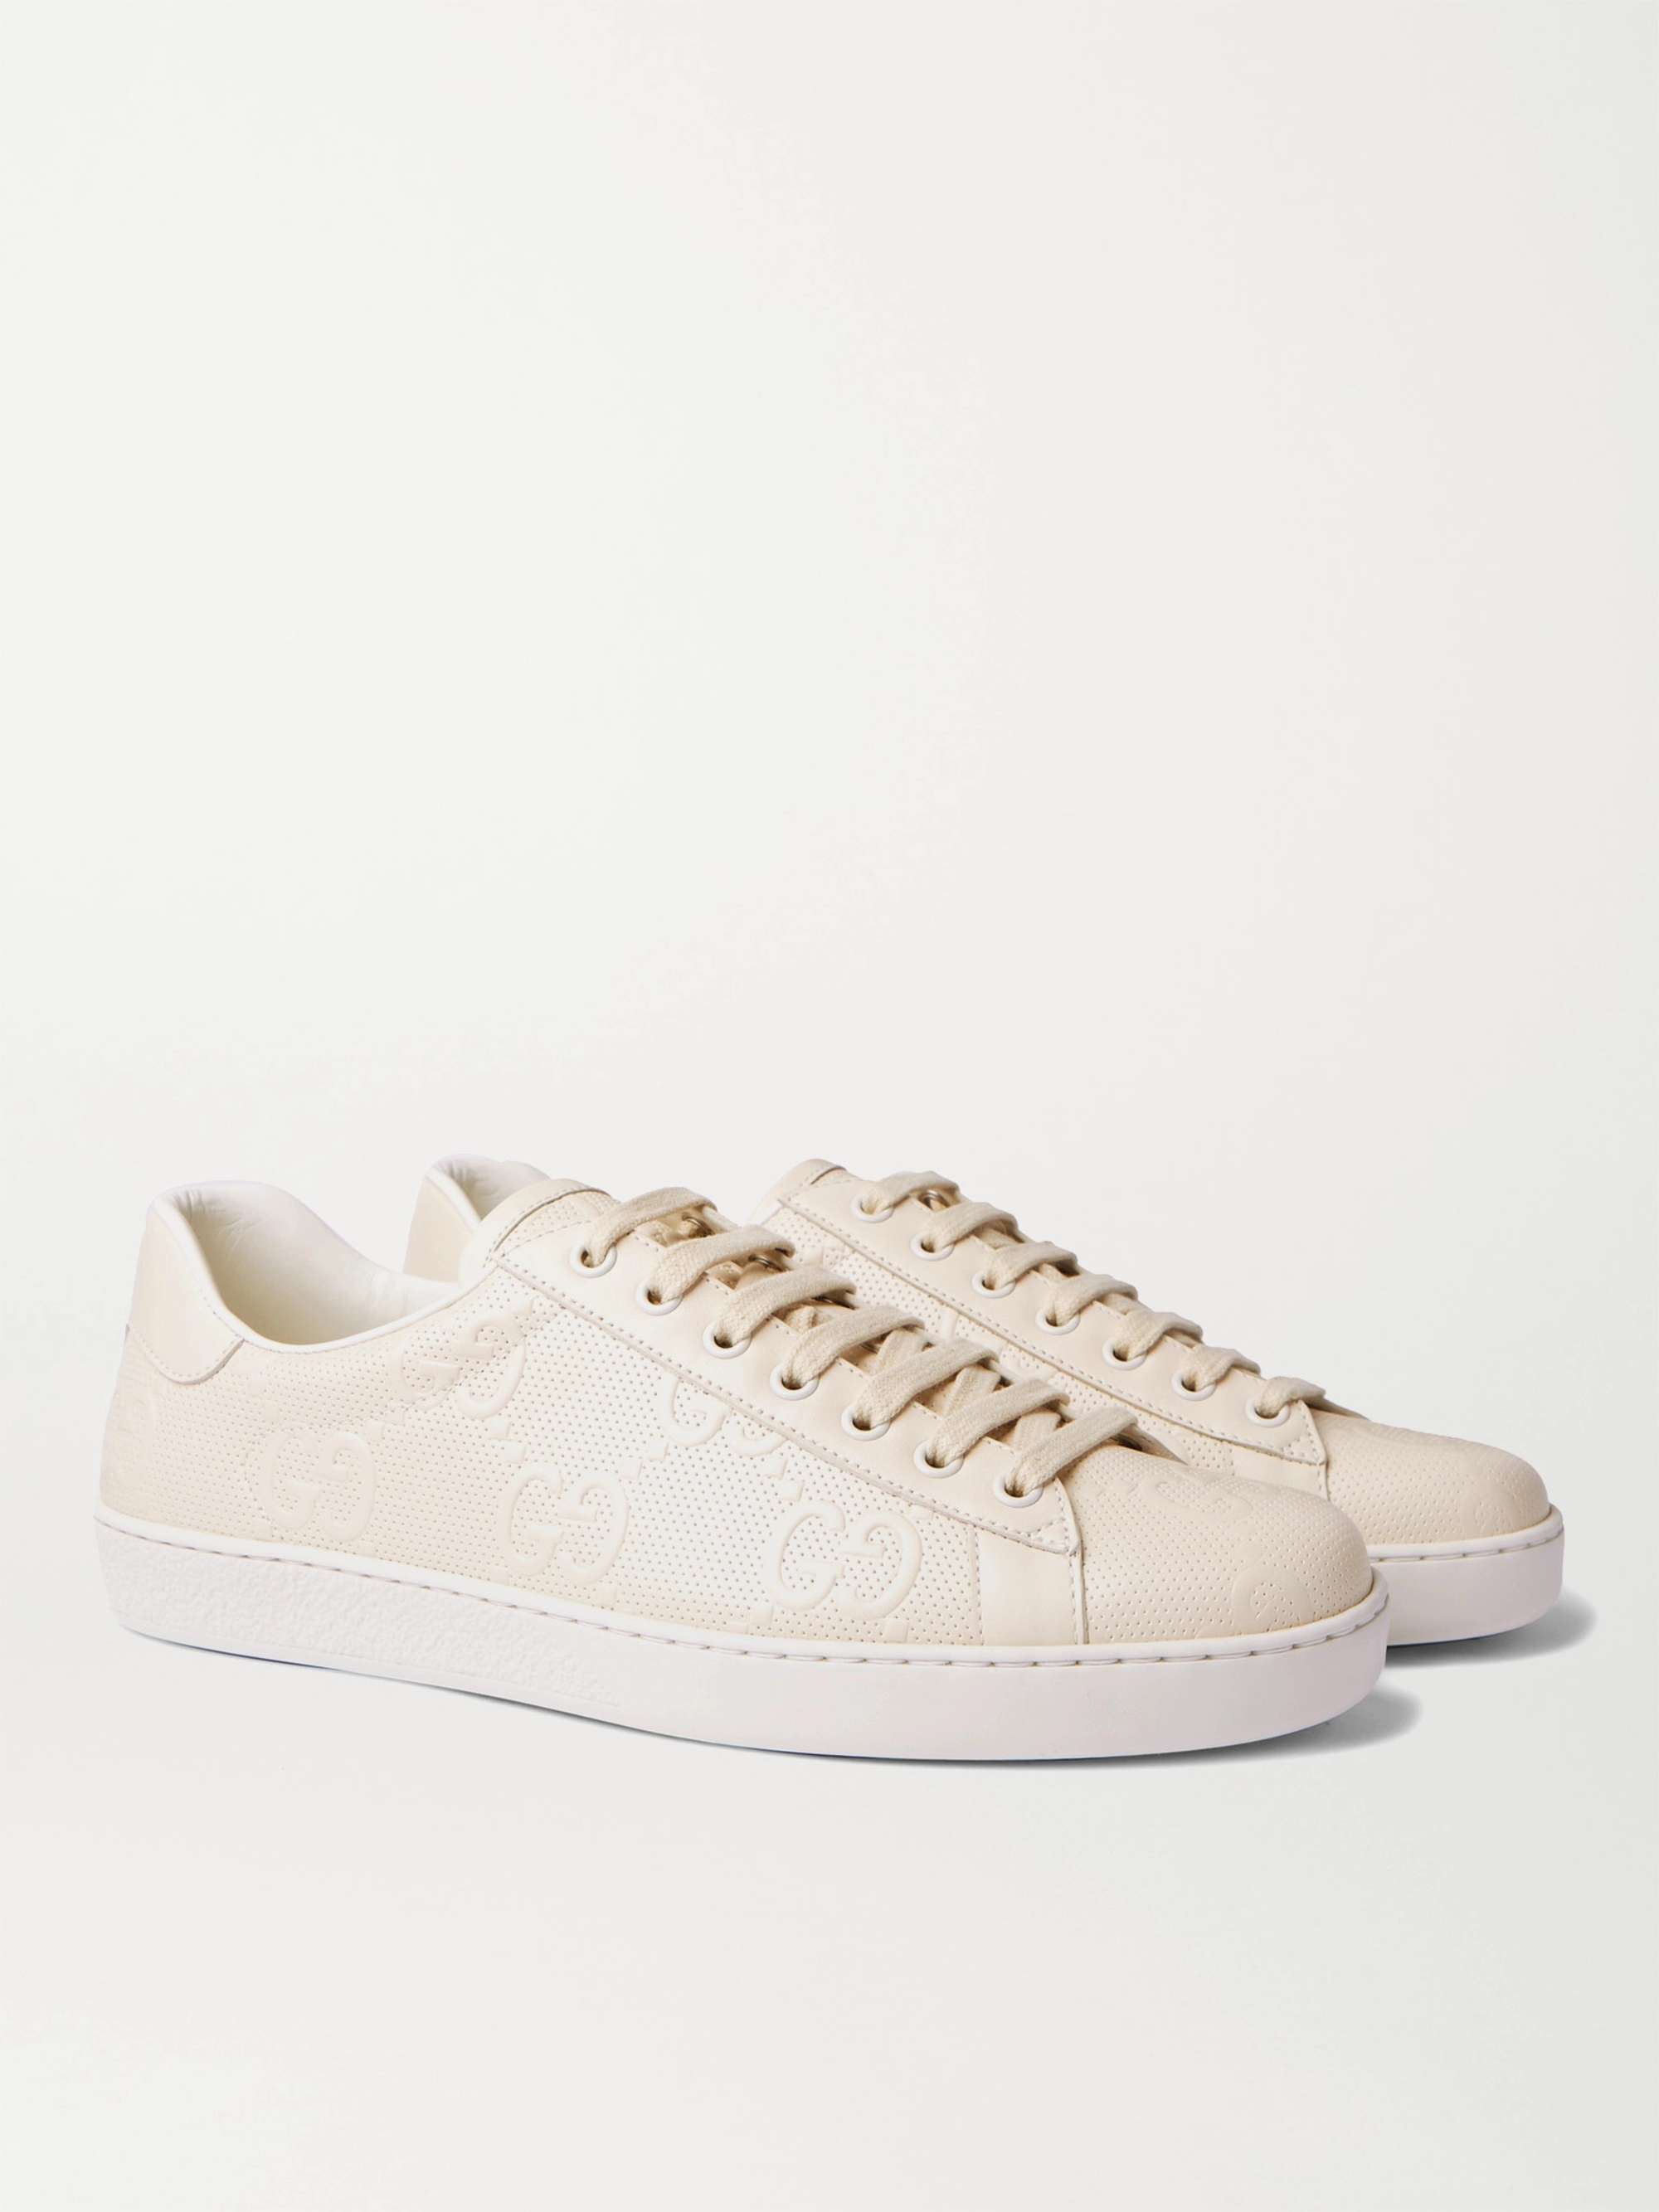 GUCCI Ace Logo-Embossed Perforated Leather Sneakers | MR PORTER